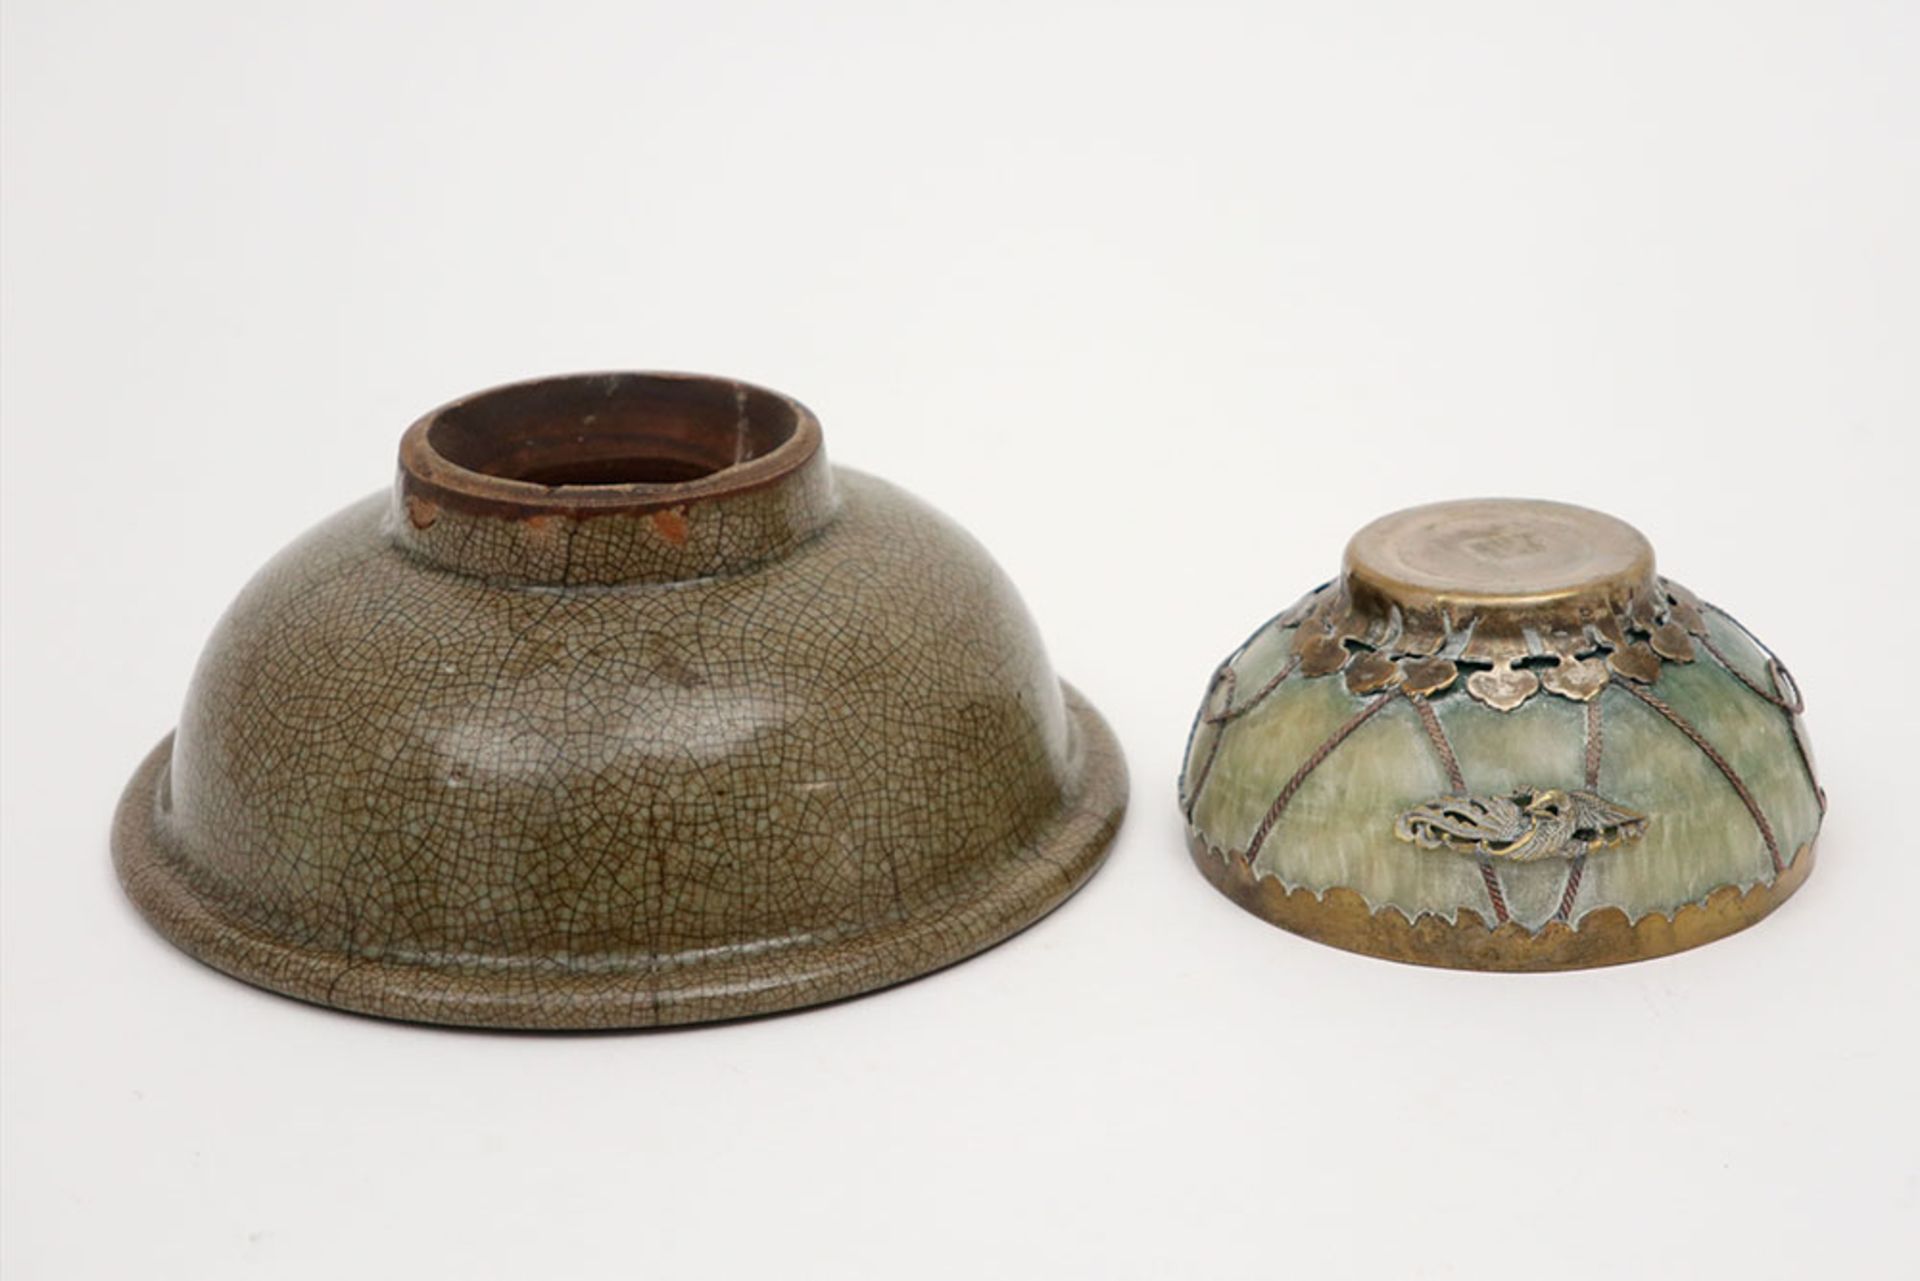 antique Chinese bowl in crackle glazed porcelain and a small Chinese marked bowl in a greenish stone - Image 3 of 7